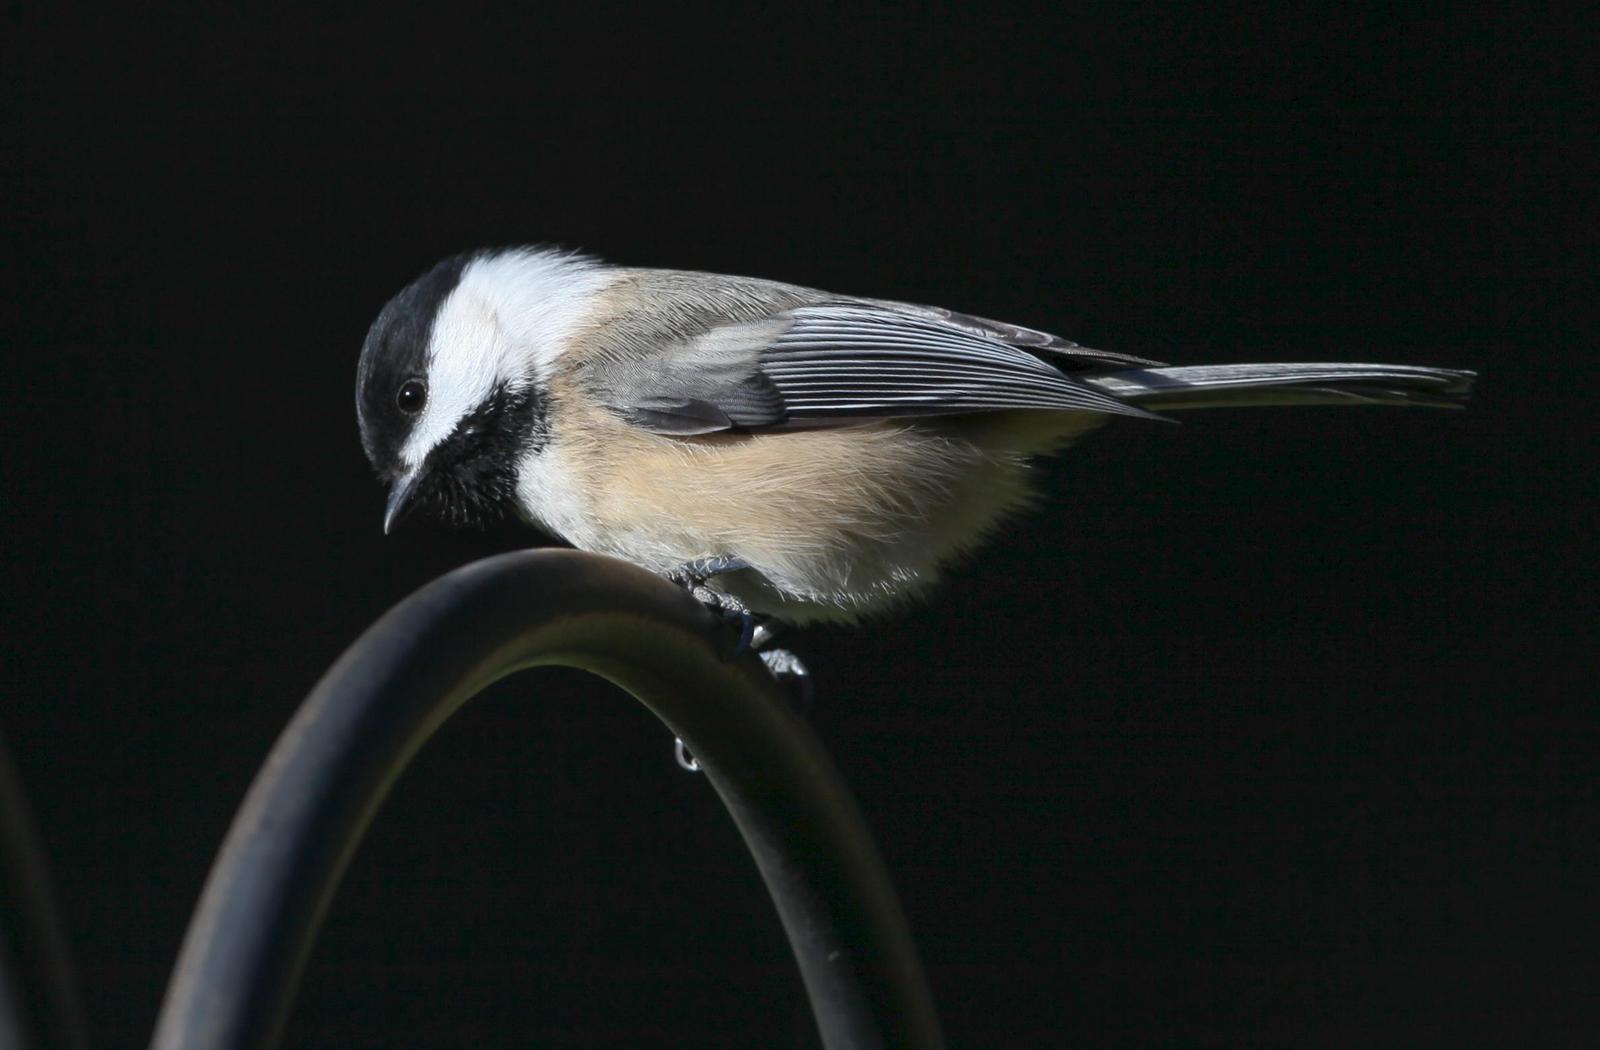 Black-capped Chickadee Photo by Lucy Wightman